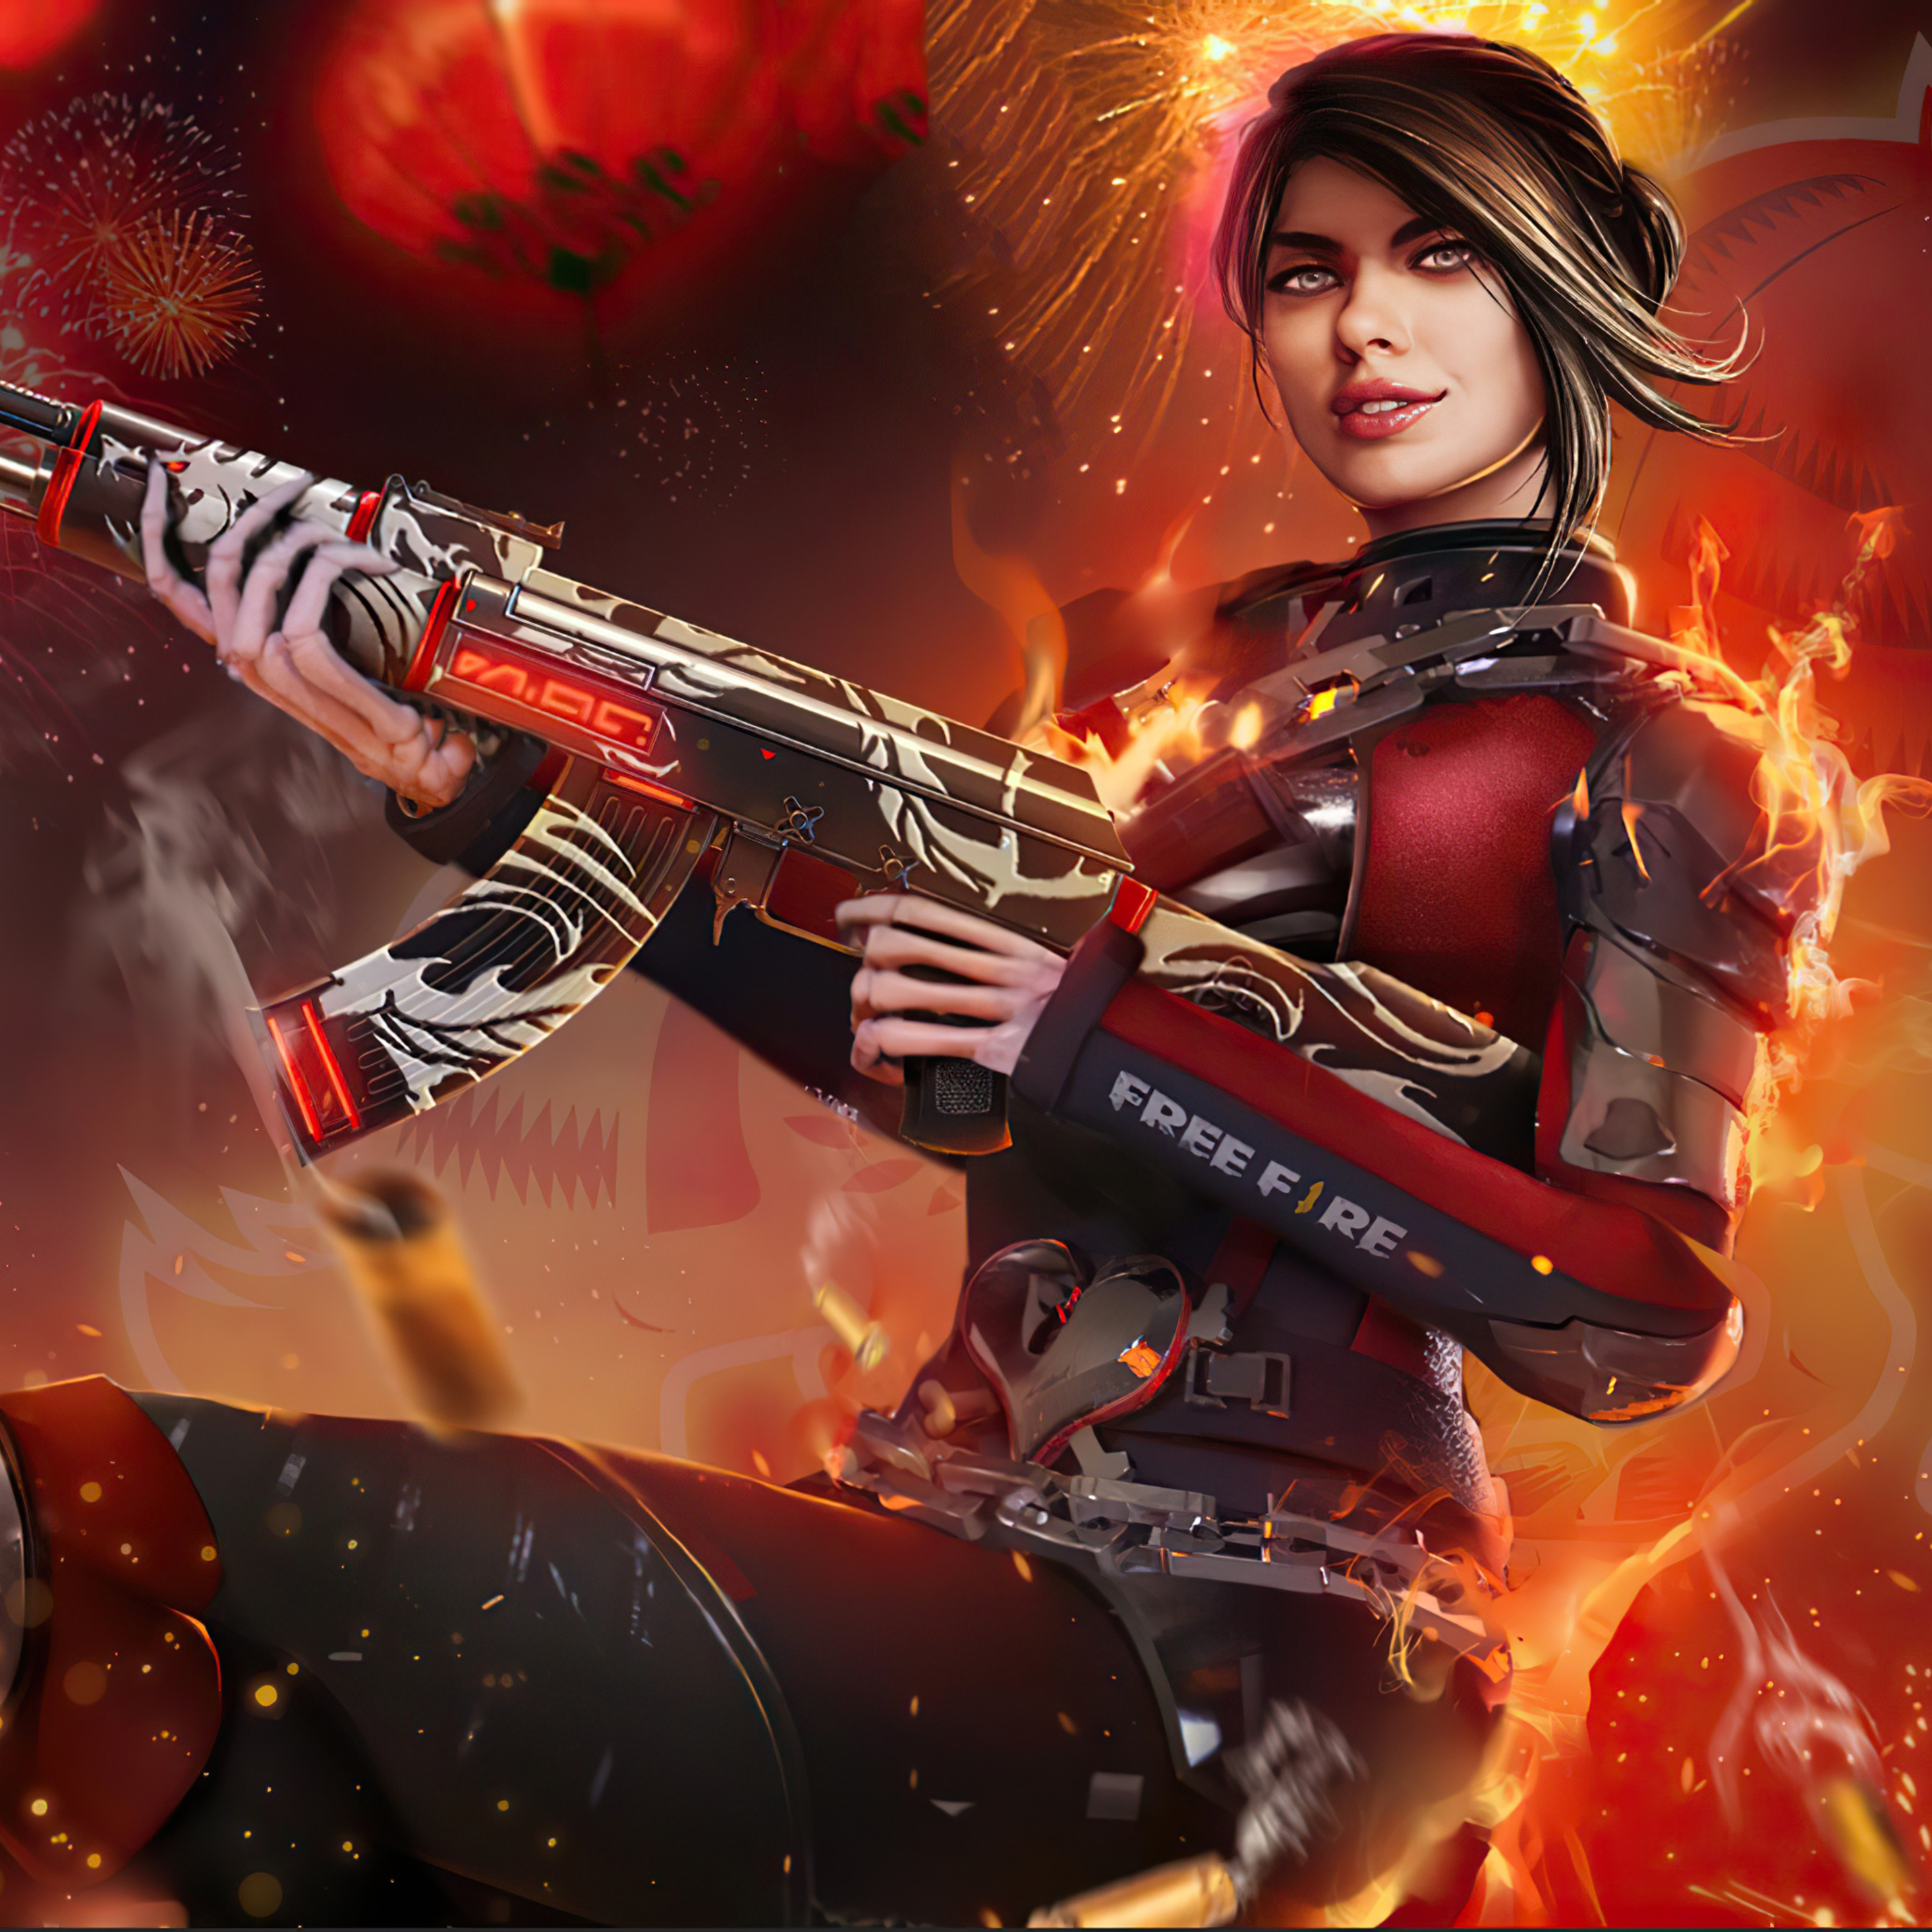 2932x2932 Garena Free Fire 4k Game 2020 Ipad Pro Retina Display Hd 4k Wallpapers Images Backgrounds Photos And Pictures